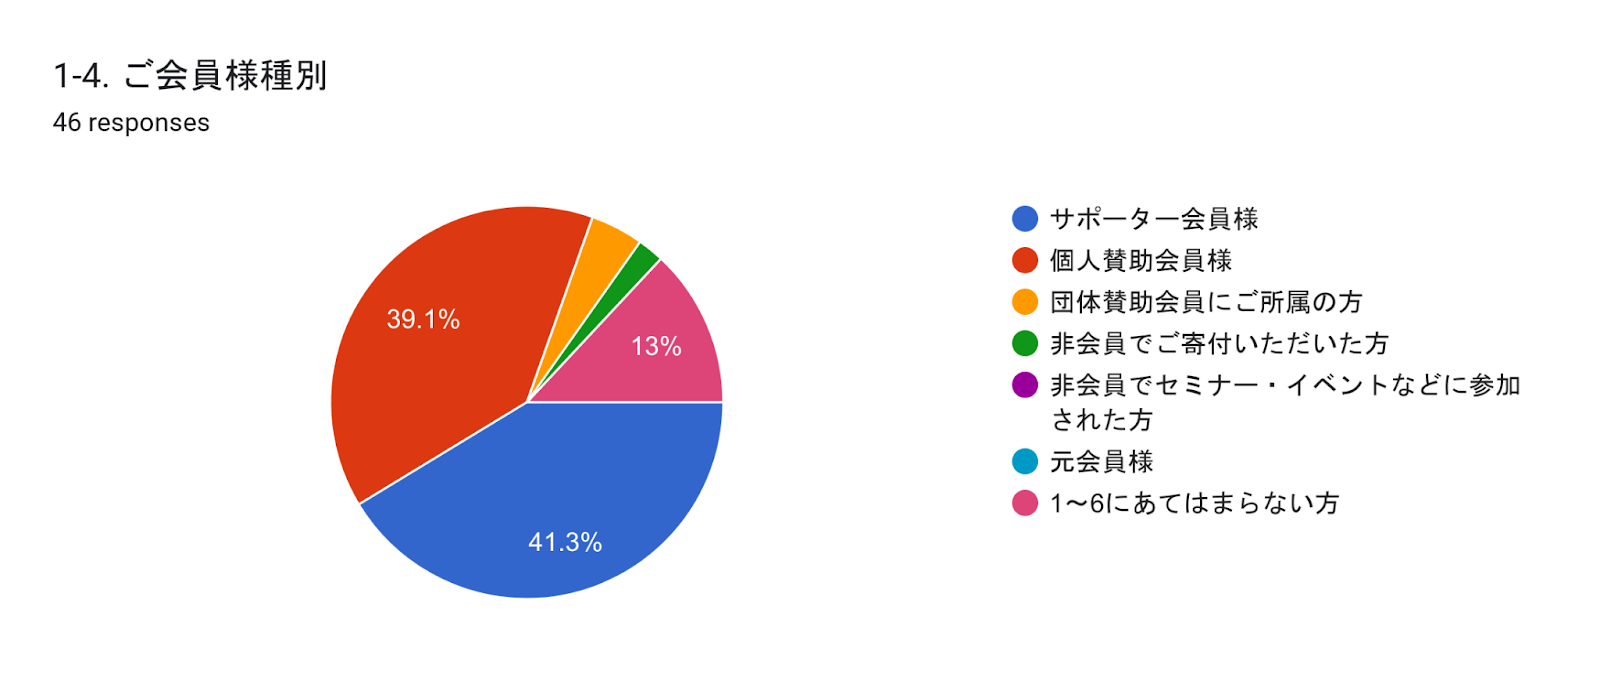 Forms response chart. Question title: 1-4. ご会員様種別. Number of responses: 42 responses.